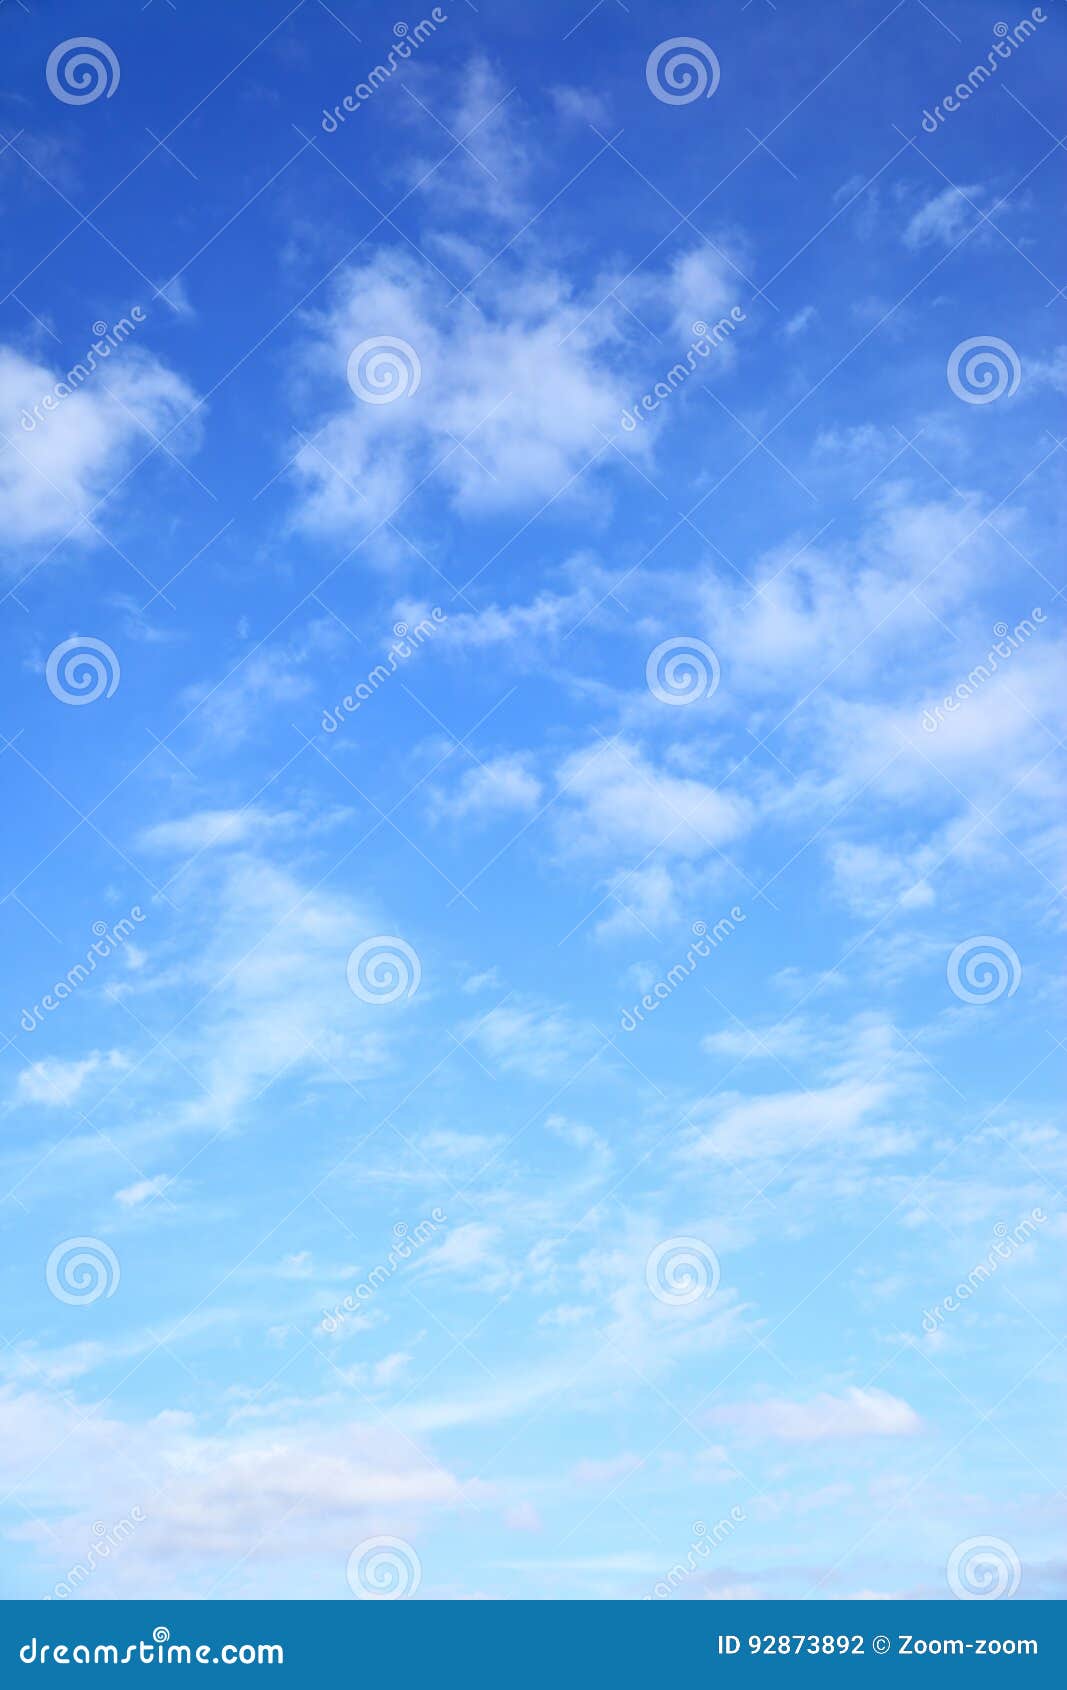 Blue sky with clouds stock photo. Image of natural, ecology - 92873892